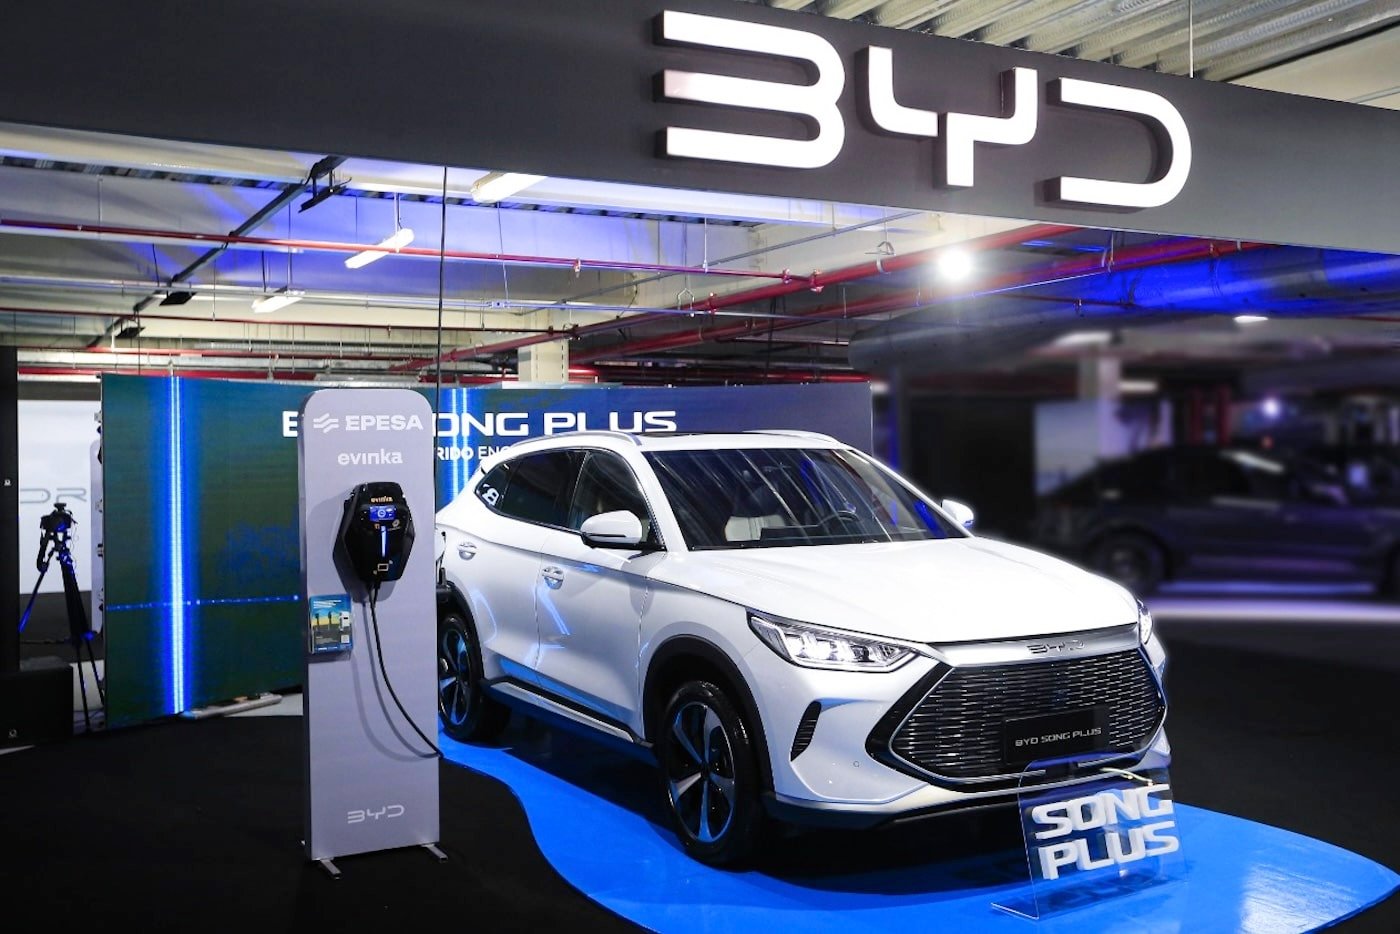 China'S Byd Has Overtaken Tesla As The World'S Best-Selling Maker Of Electric Cars. In The Final Quarter Of Last Year, Byd, Backed By Warren Buffett, Sold 526,409 Fully Electric Vehicles, Outpacing Tesla'S 484,507.